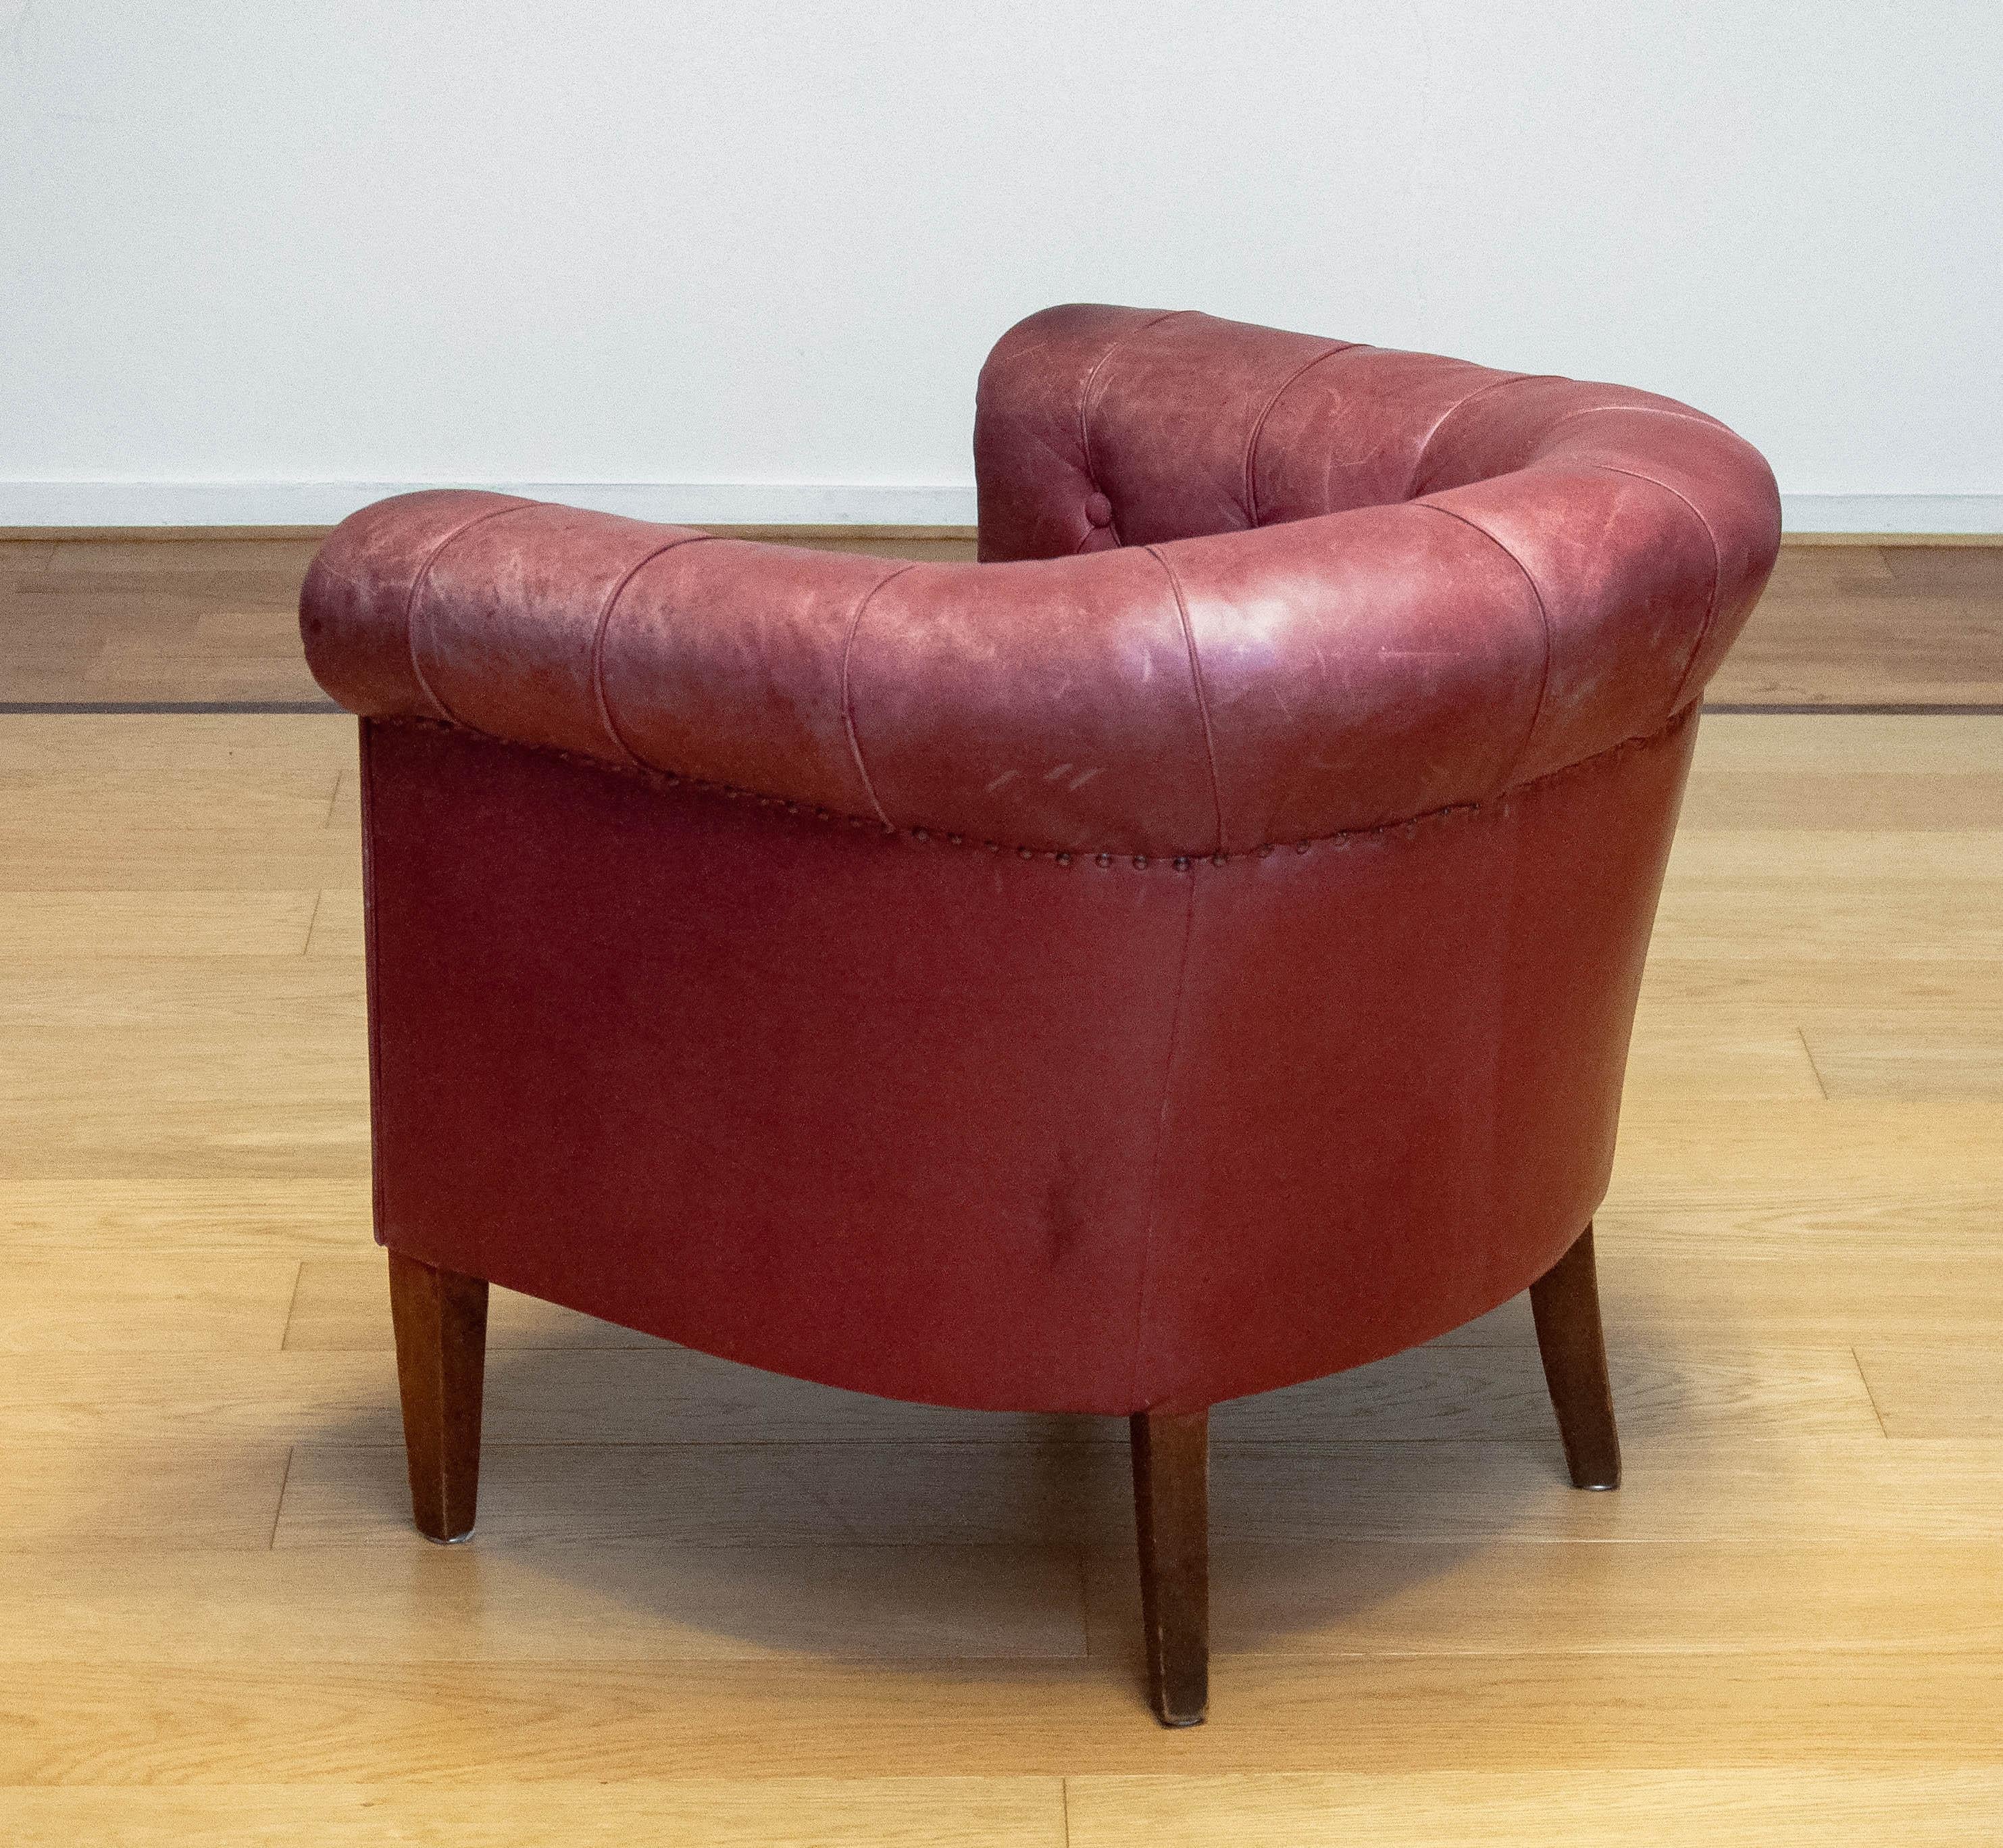 1930s Swedish Crimson Red Chesterfield Club / Lounge Chair in Patinated Leather In Good Condition For Sale In Silvolde, Gelderland